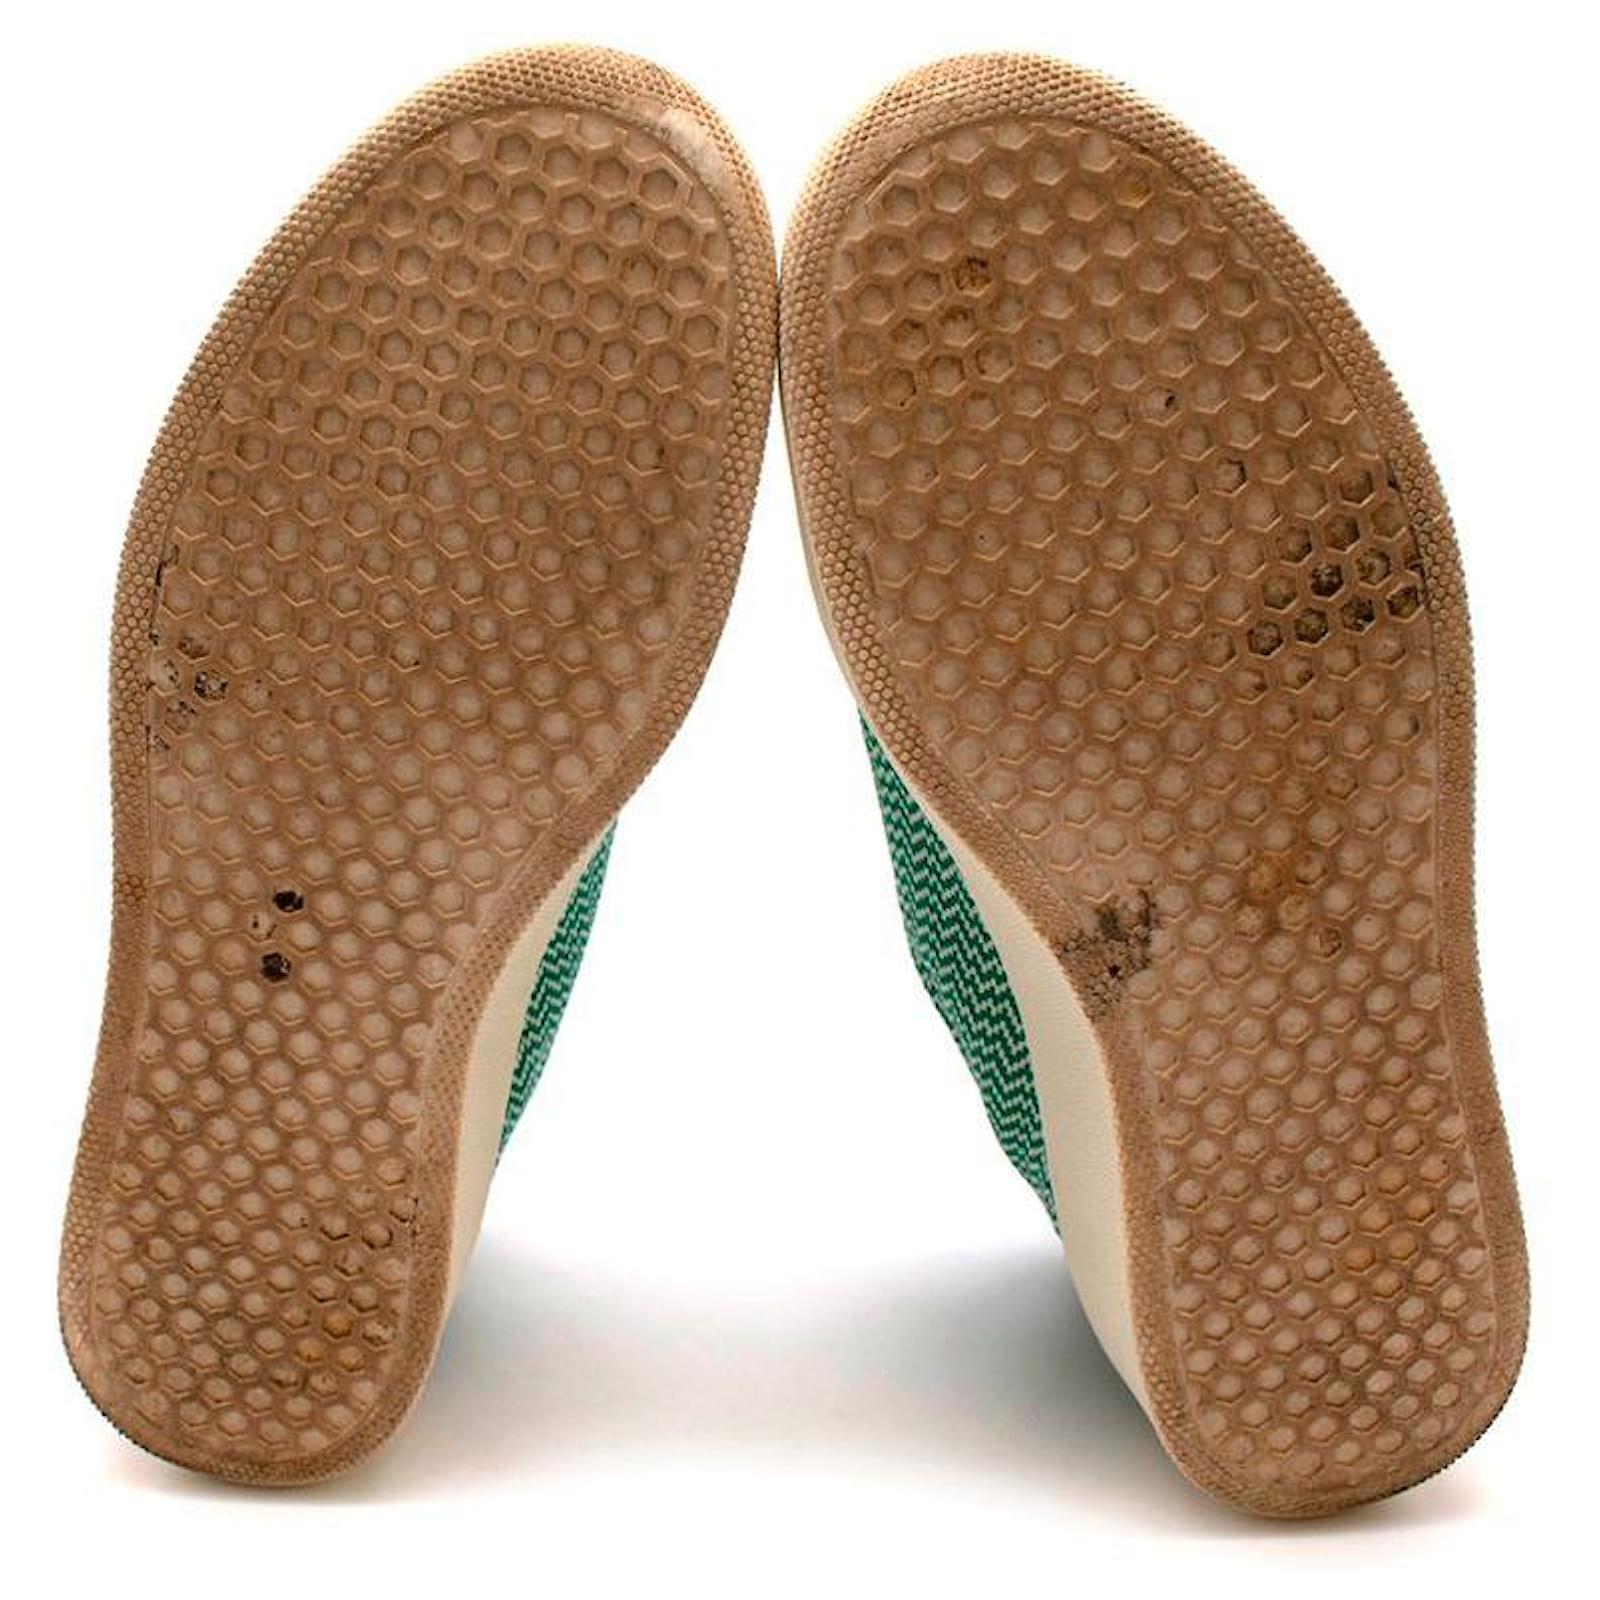 Céline Celine by Phoebe Philo Green Knit Pull-on Trainers Leather  ref.594113 - Joli Closet